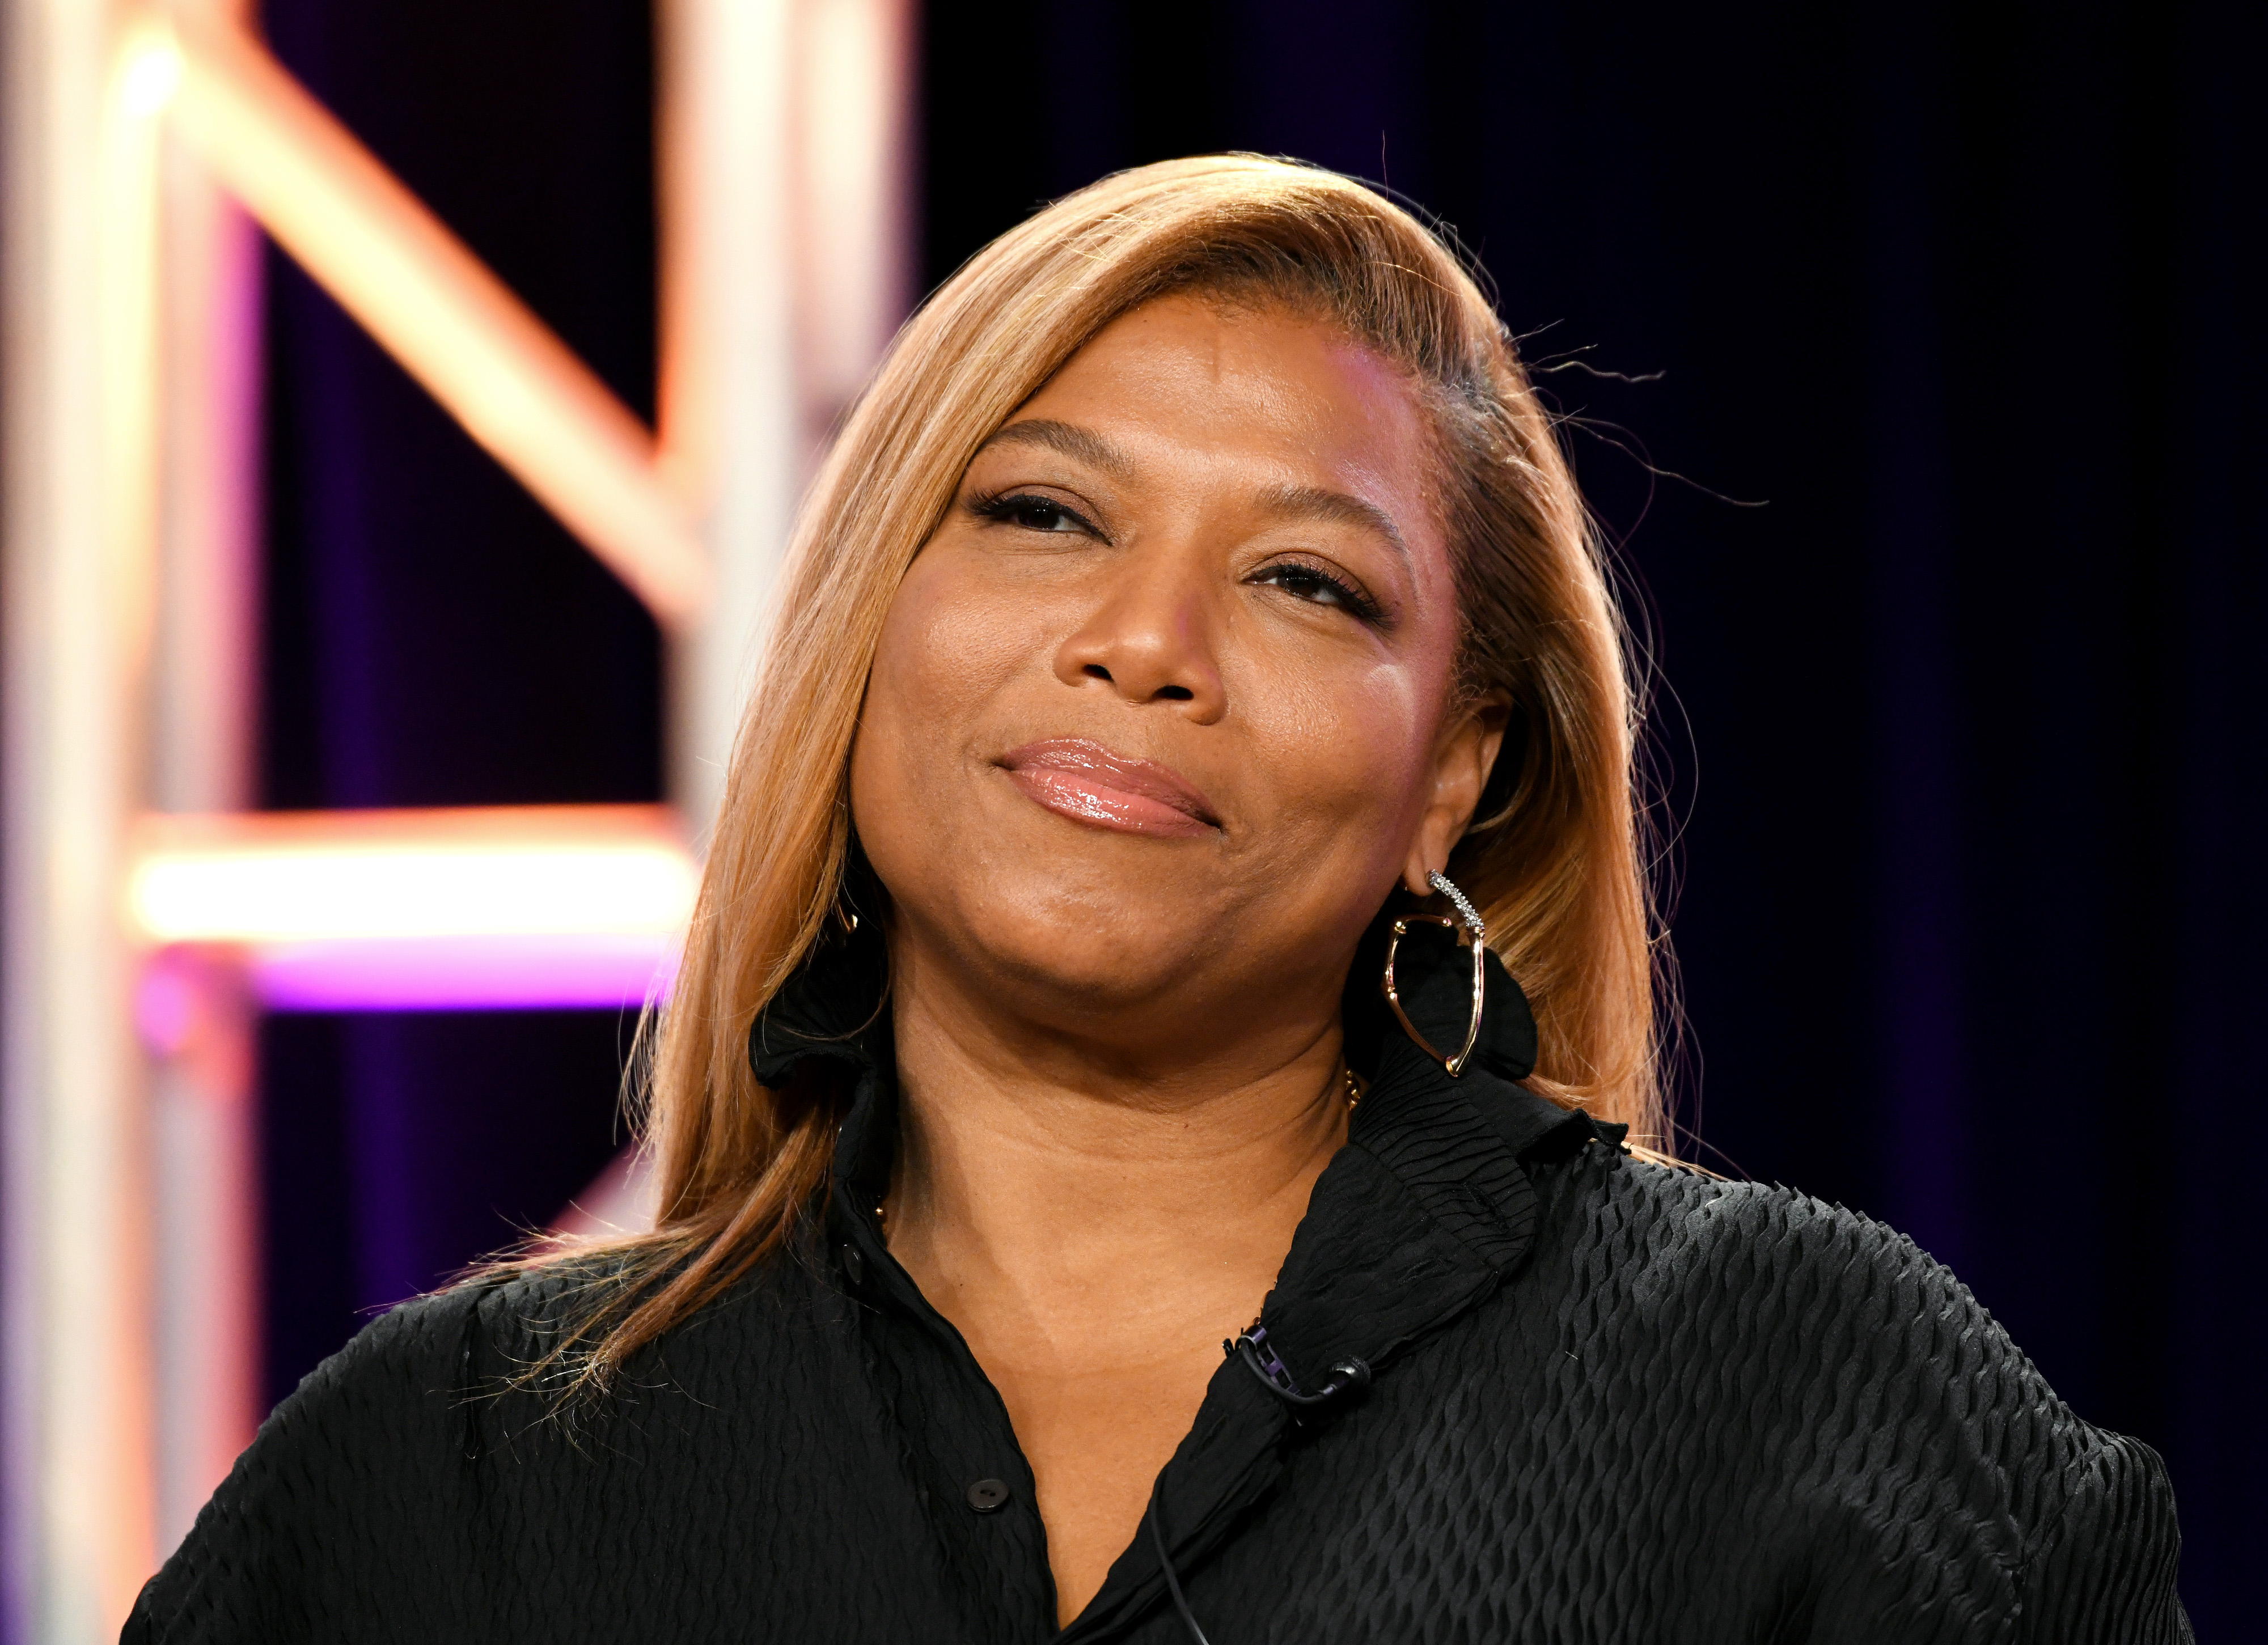 Queen Latifah is seen onstage during Lifetime's TCA Panels on January 18, 2020. (Michael Kovac—Getty Images for Lifetime)